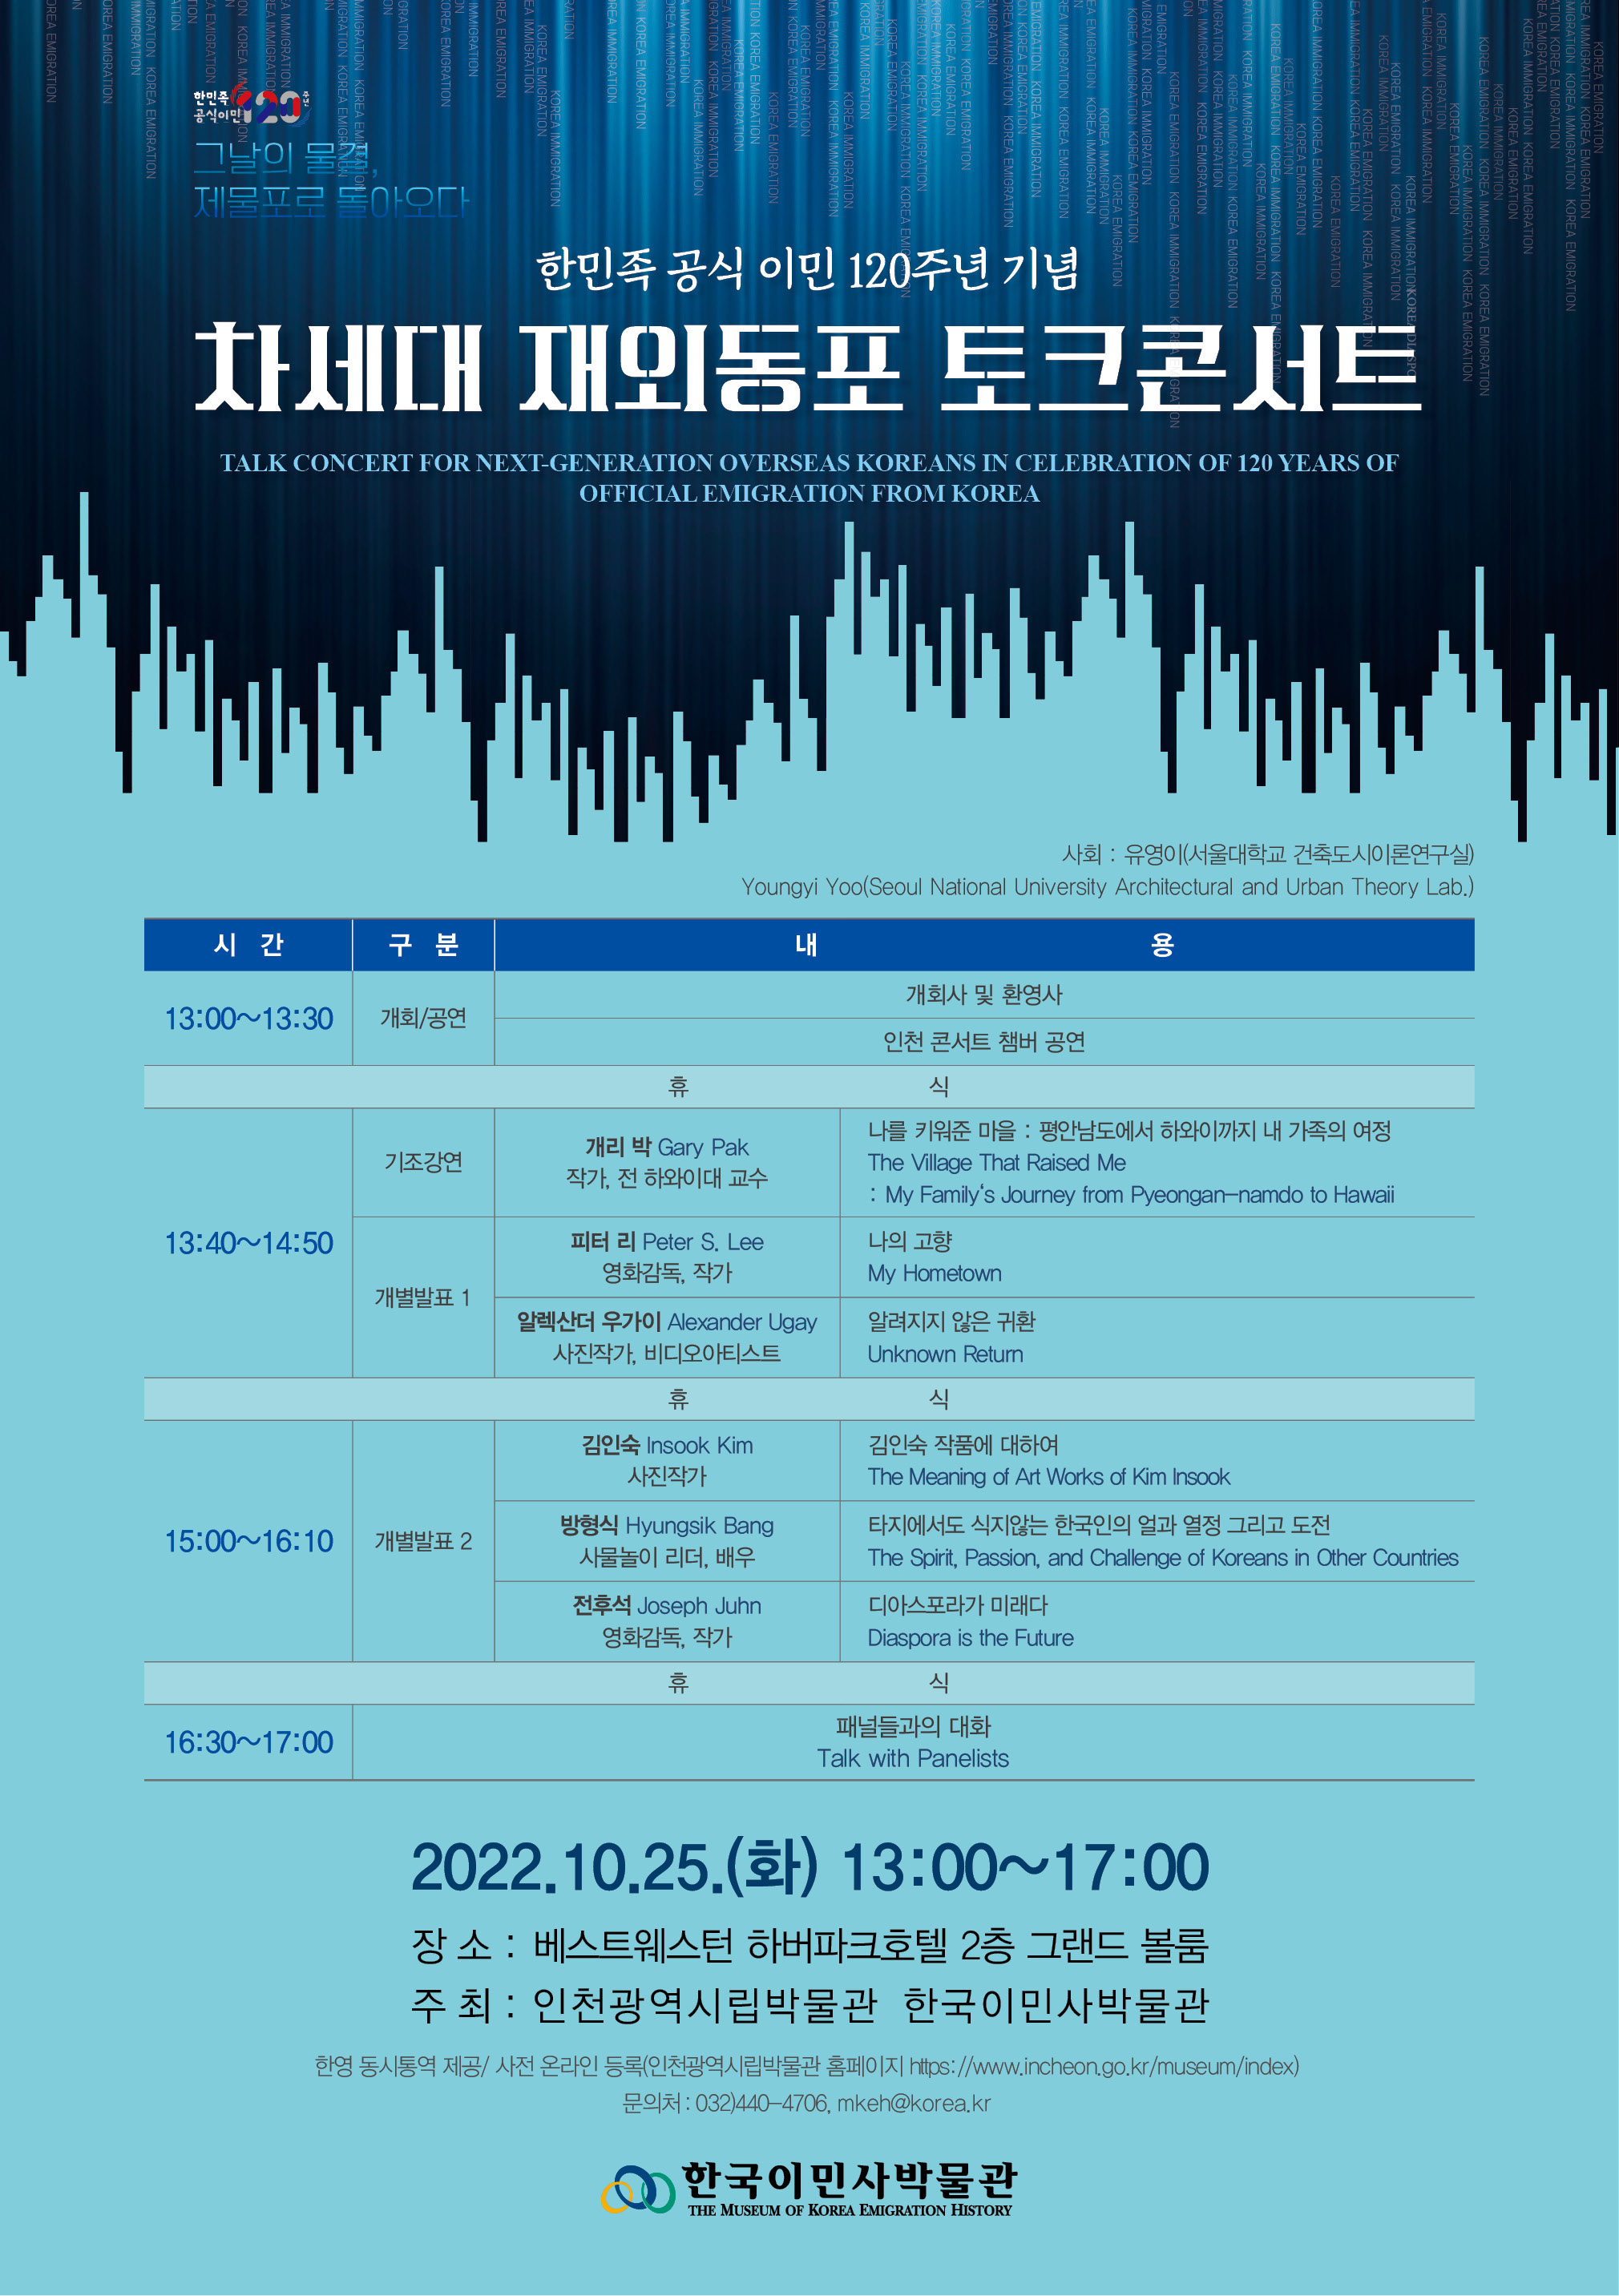 TALK CONCERT FOR NEXT-GENERATION OVERSEAS KOREANS IN CELEBRATION OF 120 YEARS OF OFFICIAL EMIGRATION FROM KOREA  ○ Date and Time : October 25, 2022 (Thu) 13:00-17:00 ○ Venue : Bestwestern Harborpark Hotel 2nd floor, Grand Ballroom ○ Host : Incheon Metropolitan City Museum/Museum of Korean Emigration History ○ Enrollment : October 15, 2022 (Sat) ~ October 25, 2022 (Tue) on Website of Incheon Metropolitan City Museum (https://www.incheon.go.kr/res/index)     ※ It can be accepted after signing up as a member. ○ Korean-English simultaneous interpretation ○ Contact us : 032)440-4706, mkeh@Korea.kr